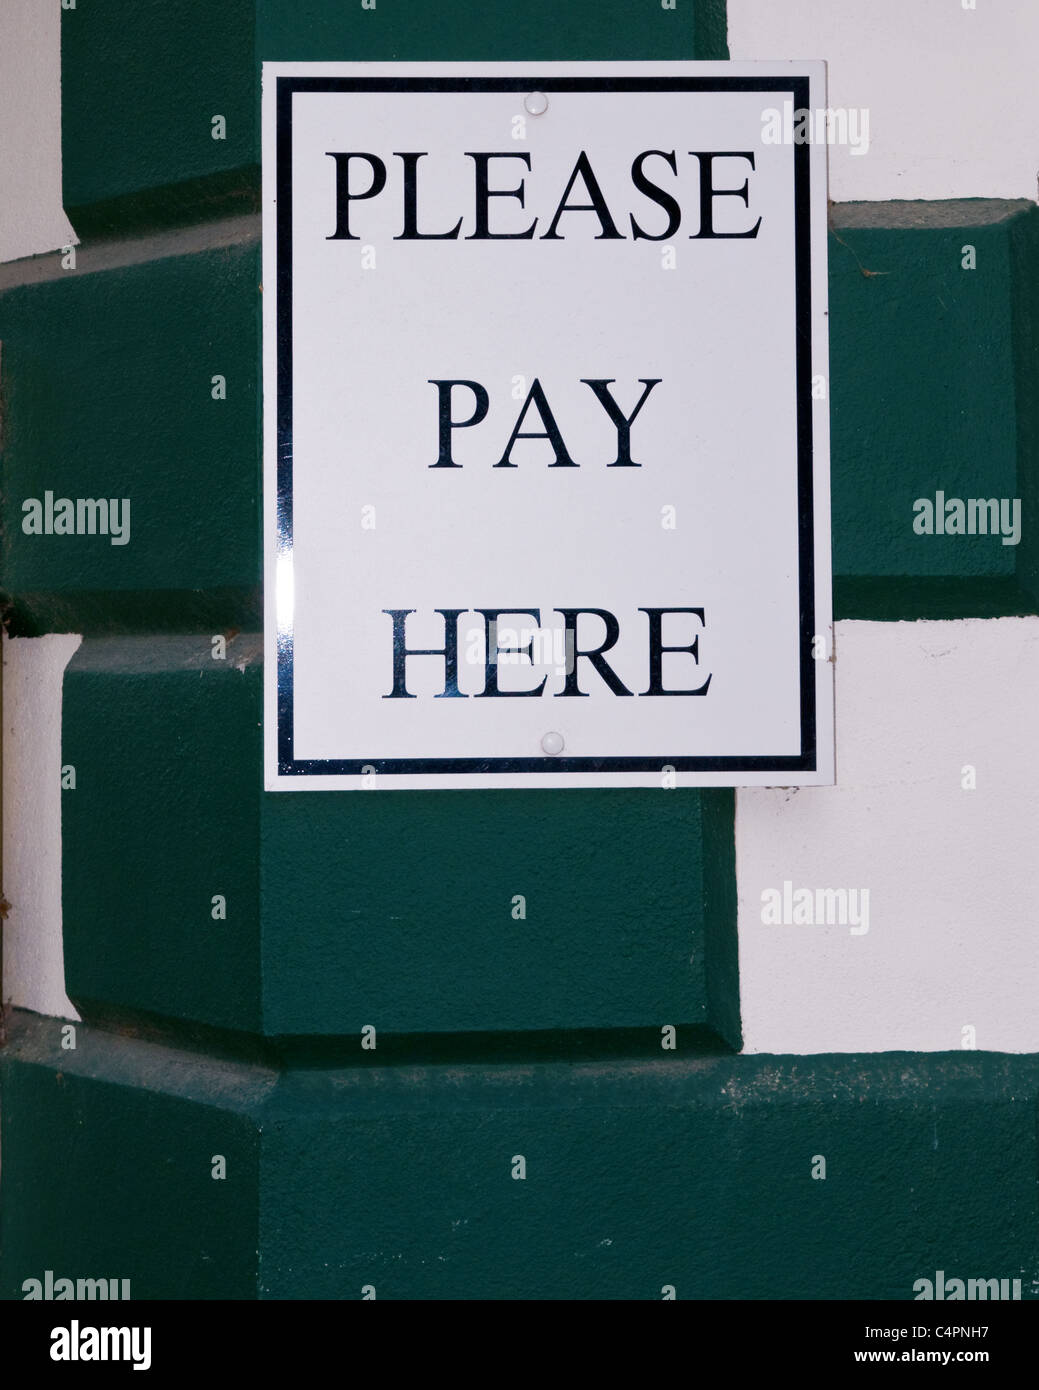 Please pay here sign Stock Photo